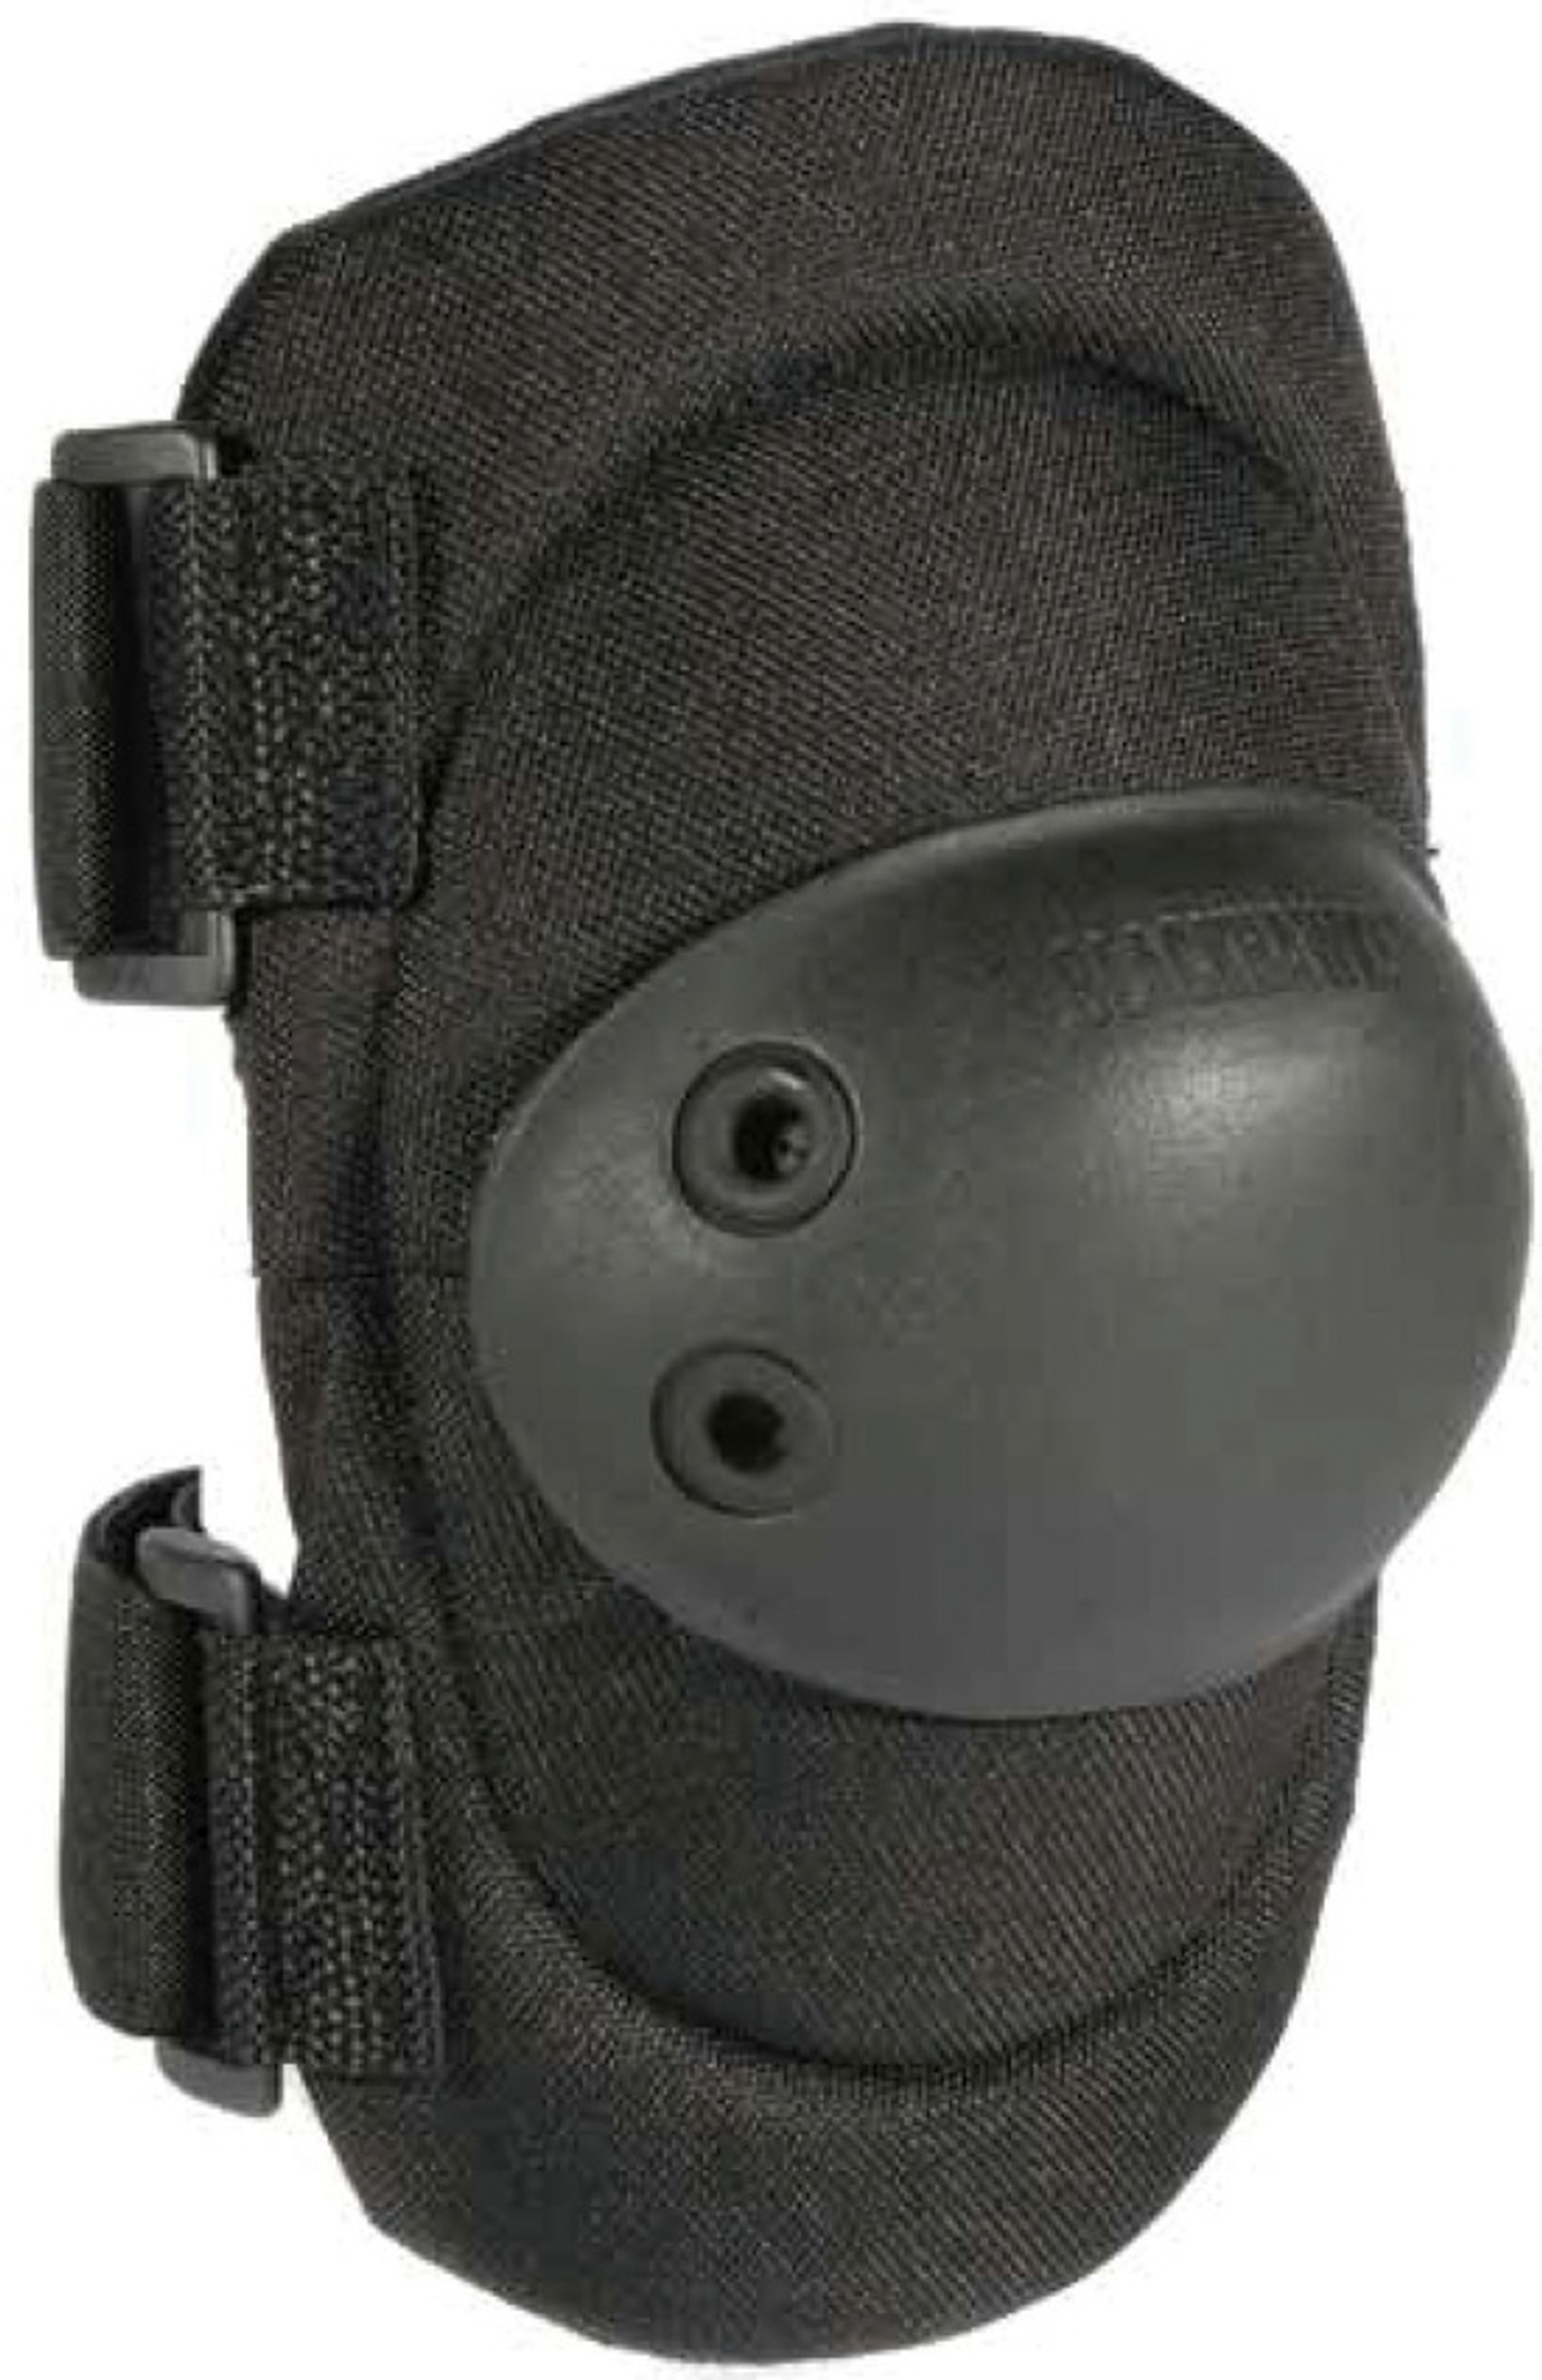 Tactical Elbow Pads BB802600BK